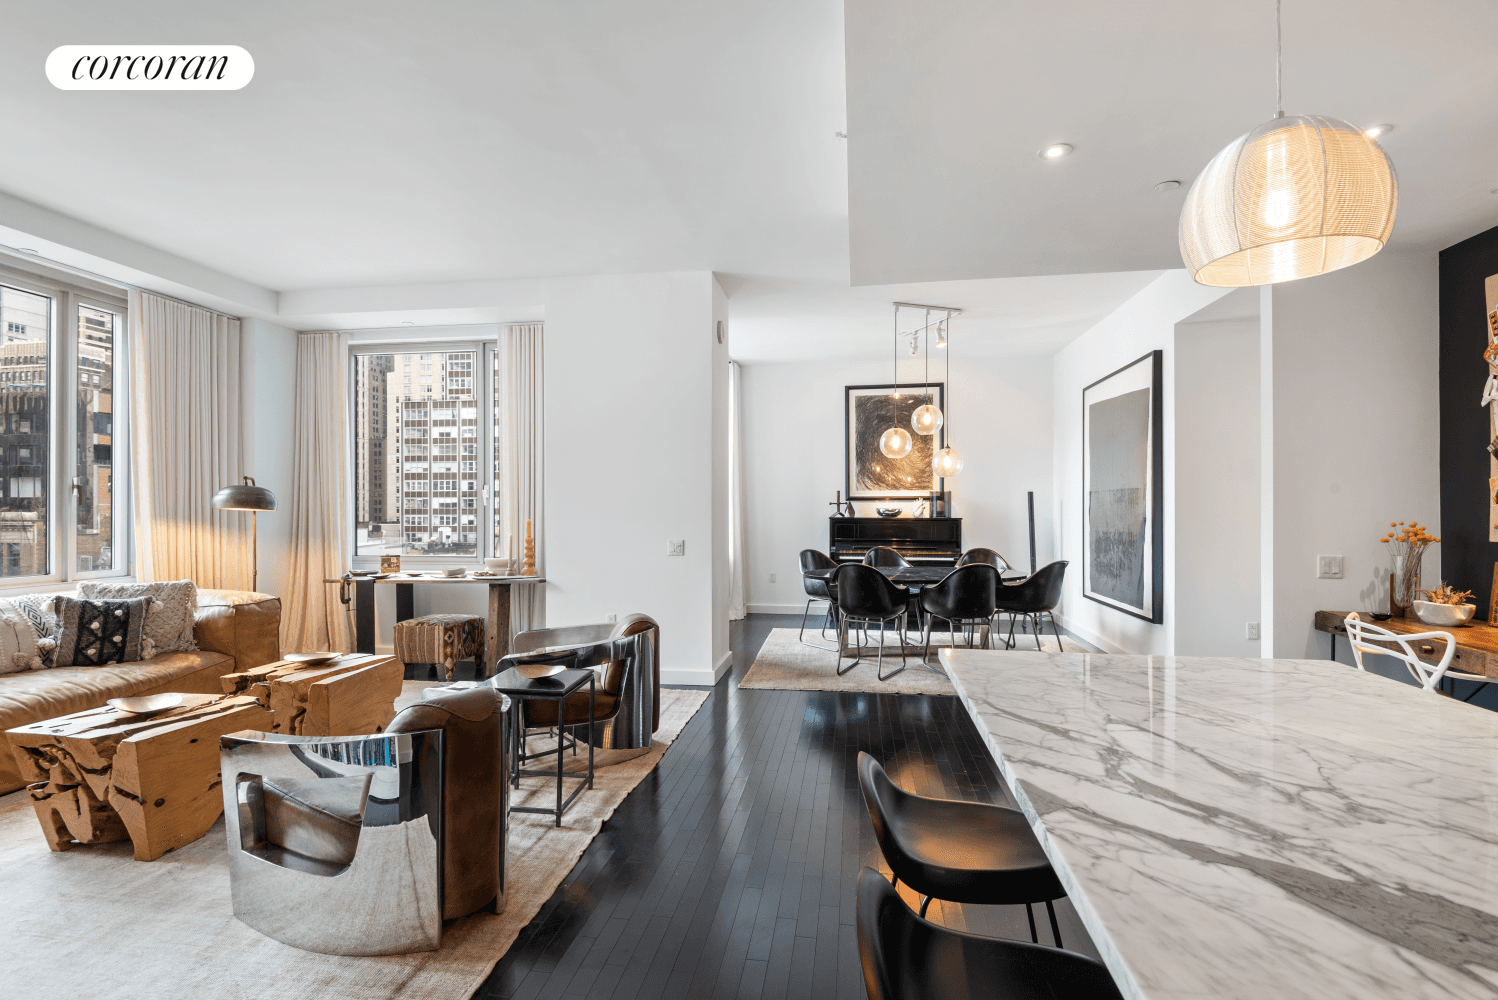 Cool Luxury Living at its best sums up the feeling one gets while being greeted by friendly concierges upon entering the ultra chic lobby of the Smyth Tribeca and using ...